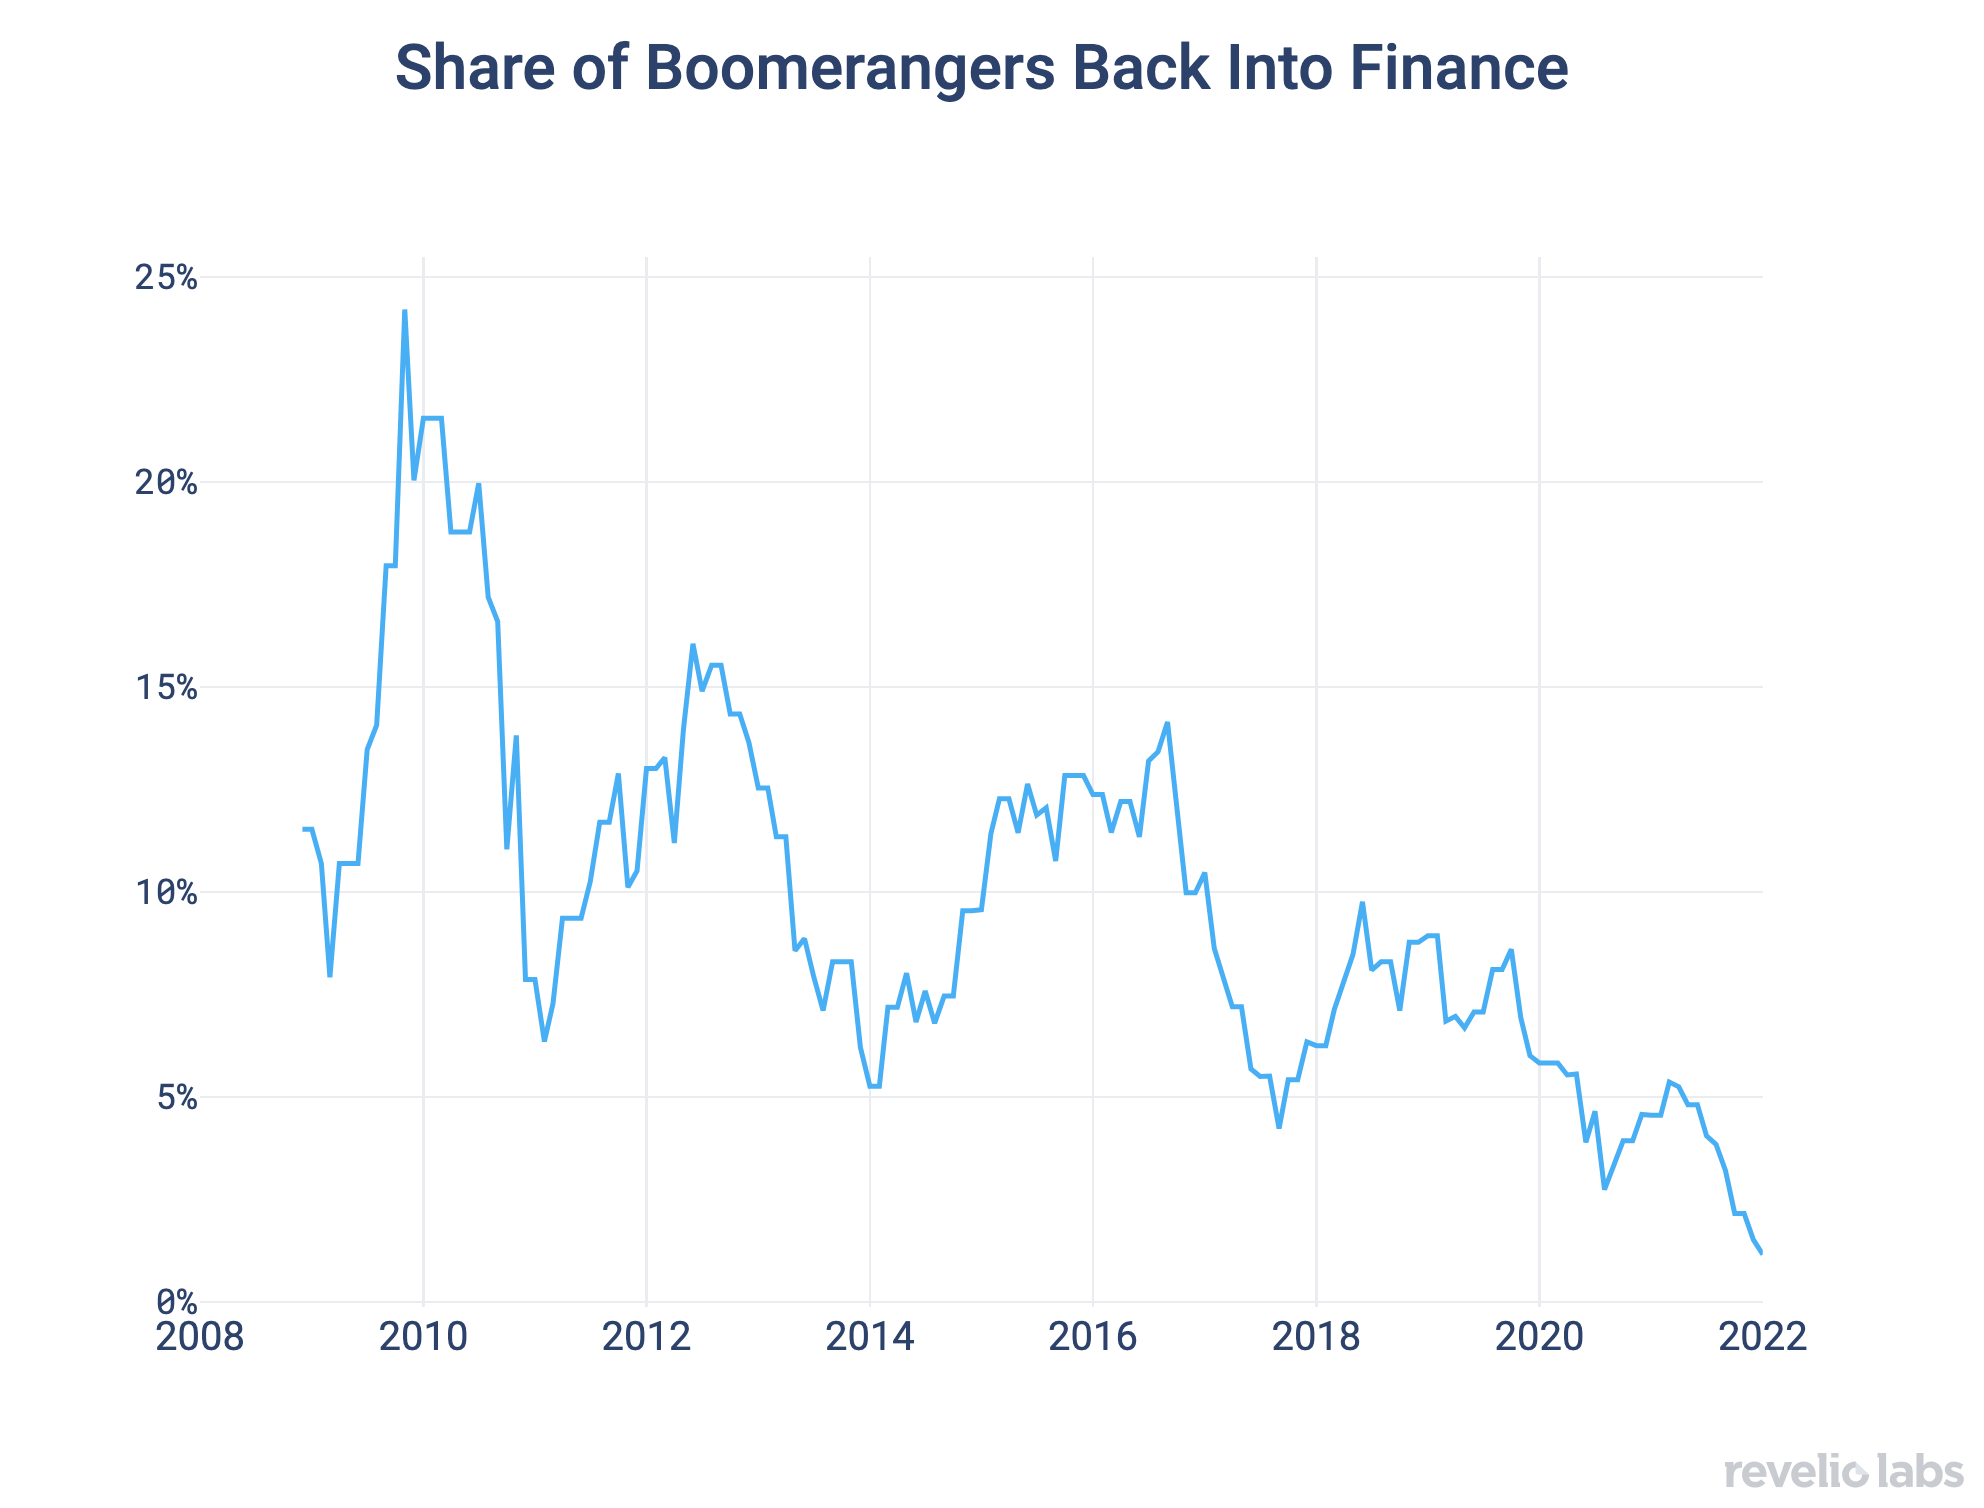 Share of Boomerangers Back into Finance